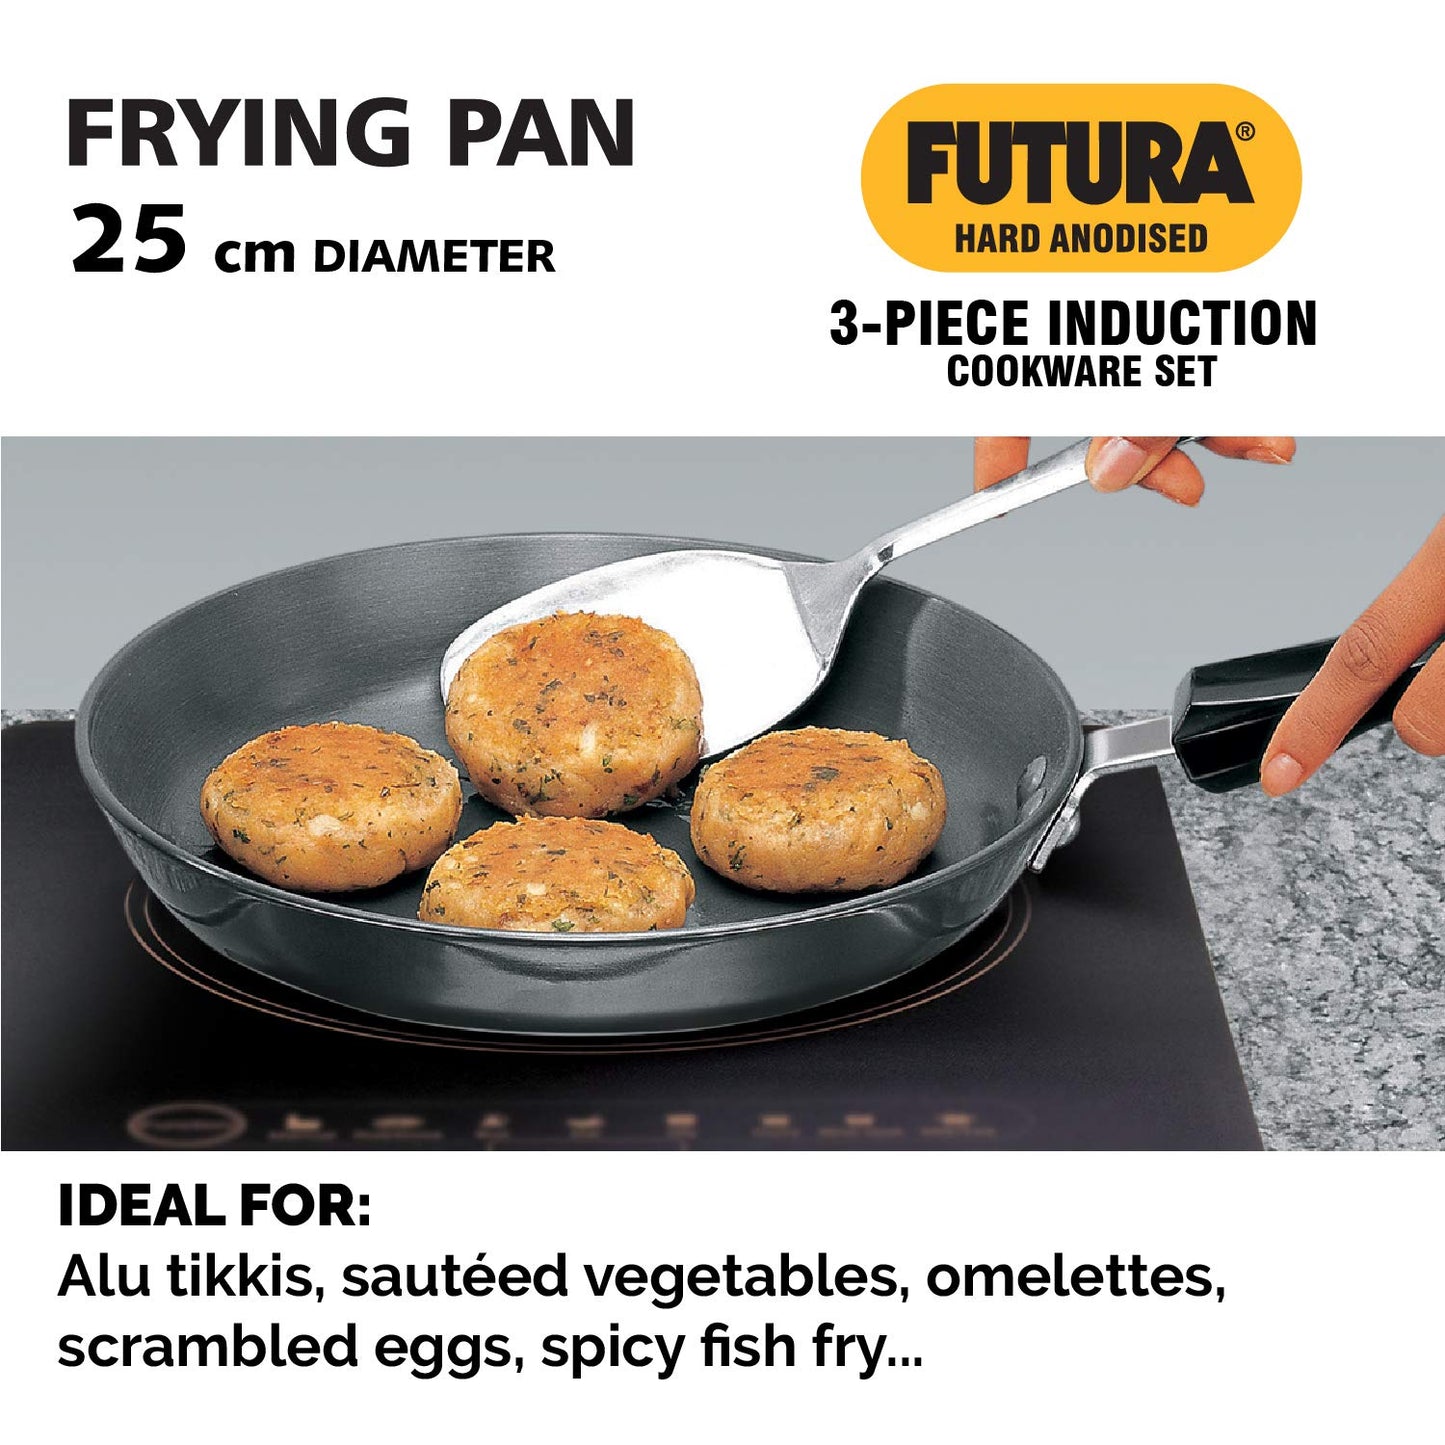 Hawkins Futura 4 Pieces Hard Anodised Induction Compatible Cookware Set 1 - 25cm Frying Pan With SS Lid, 2.5 Litres Deep Fry Pan With SS Lid and 3 Litres Cook-n-Serve Bowl with Hard Anodised Lid- IASET1